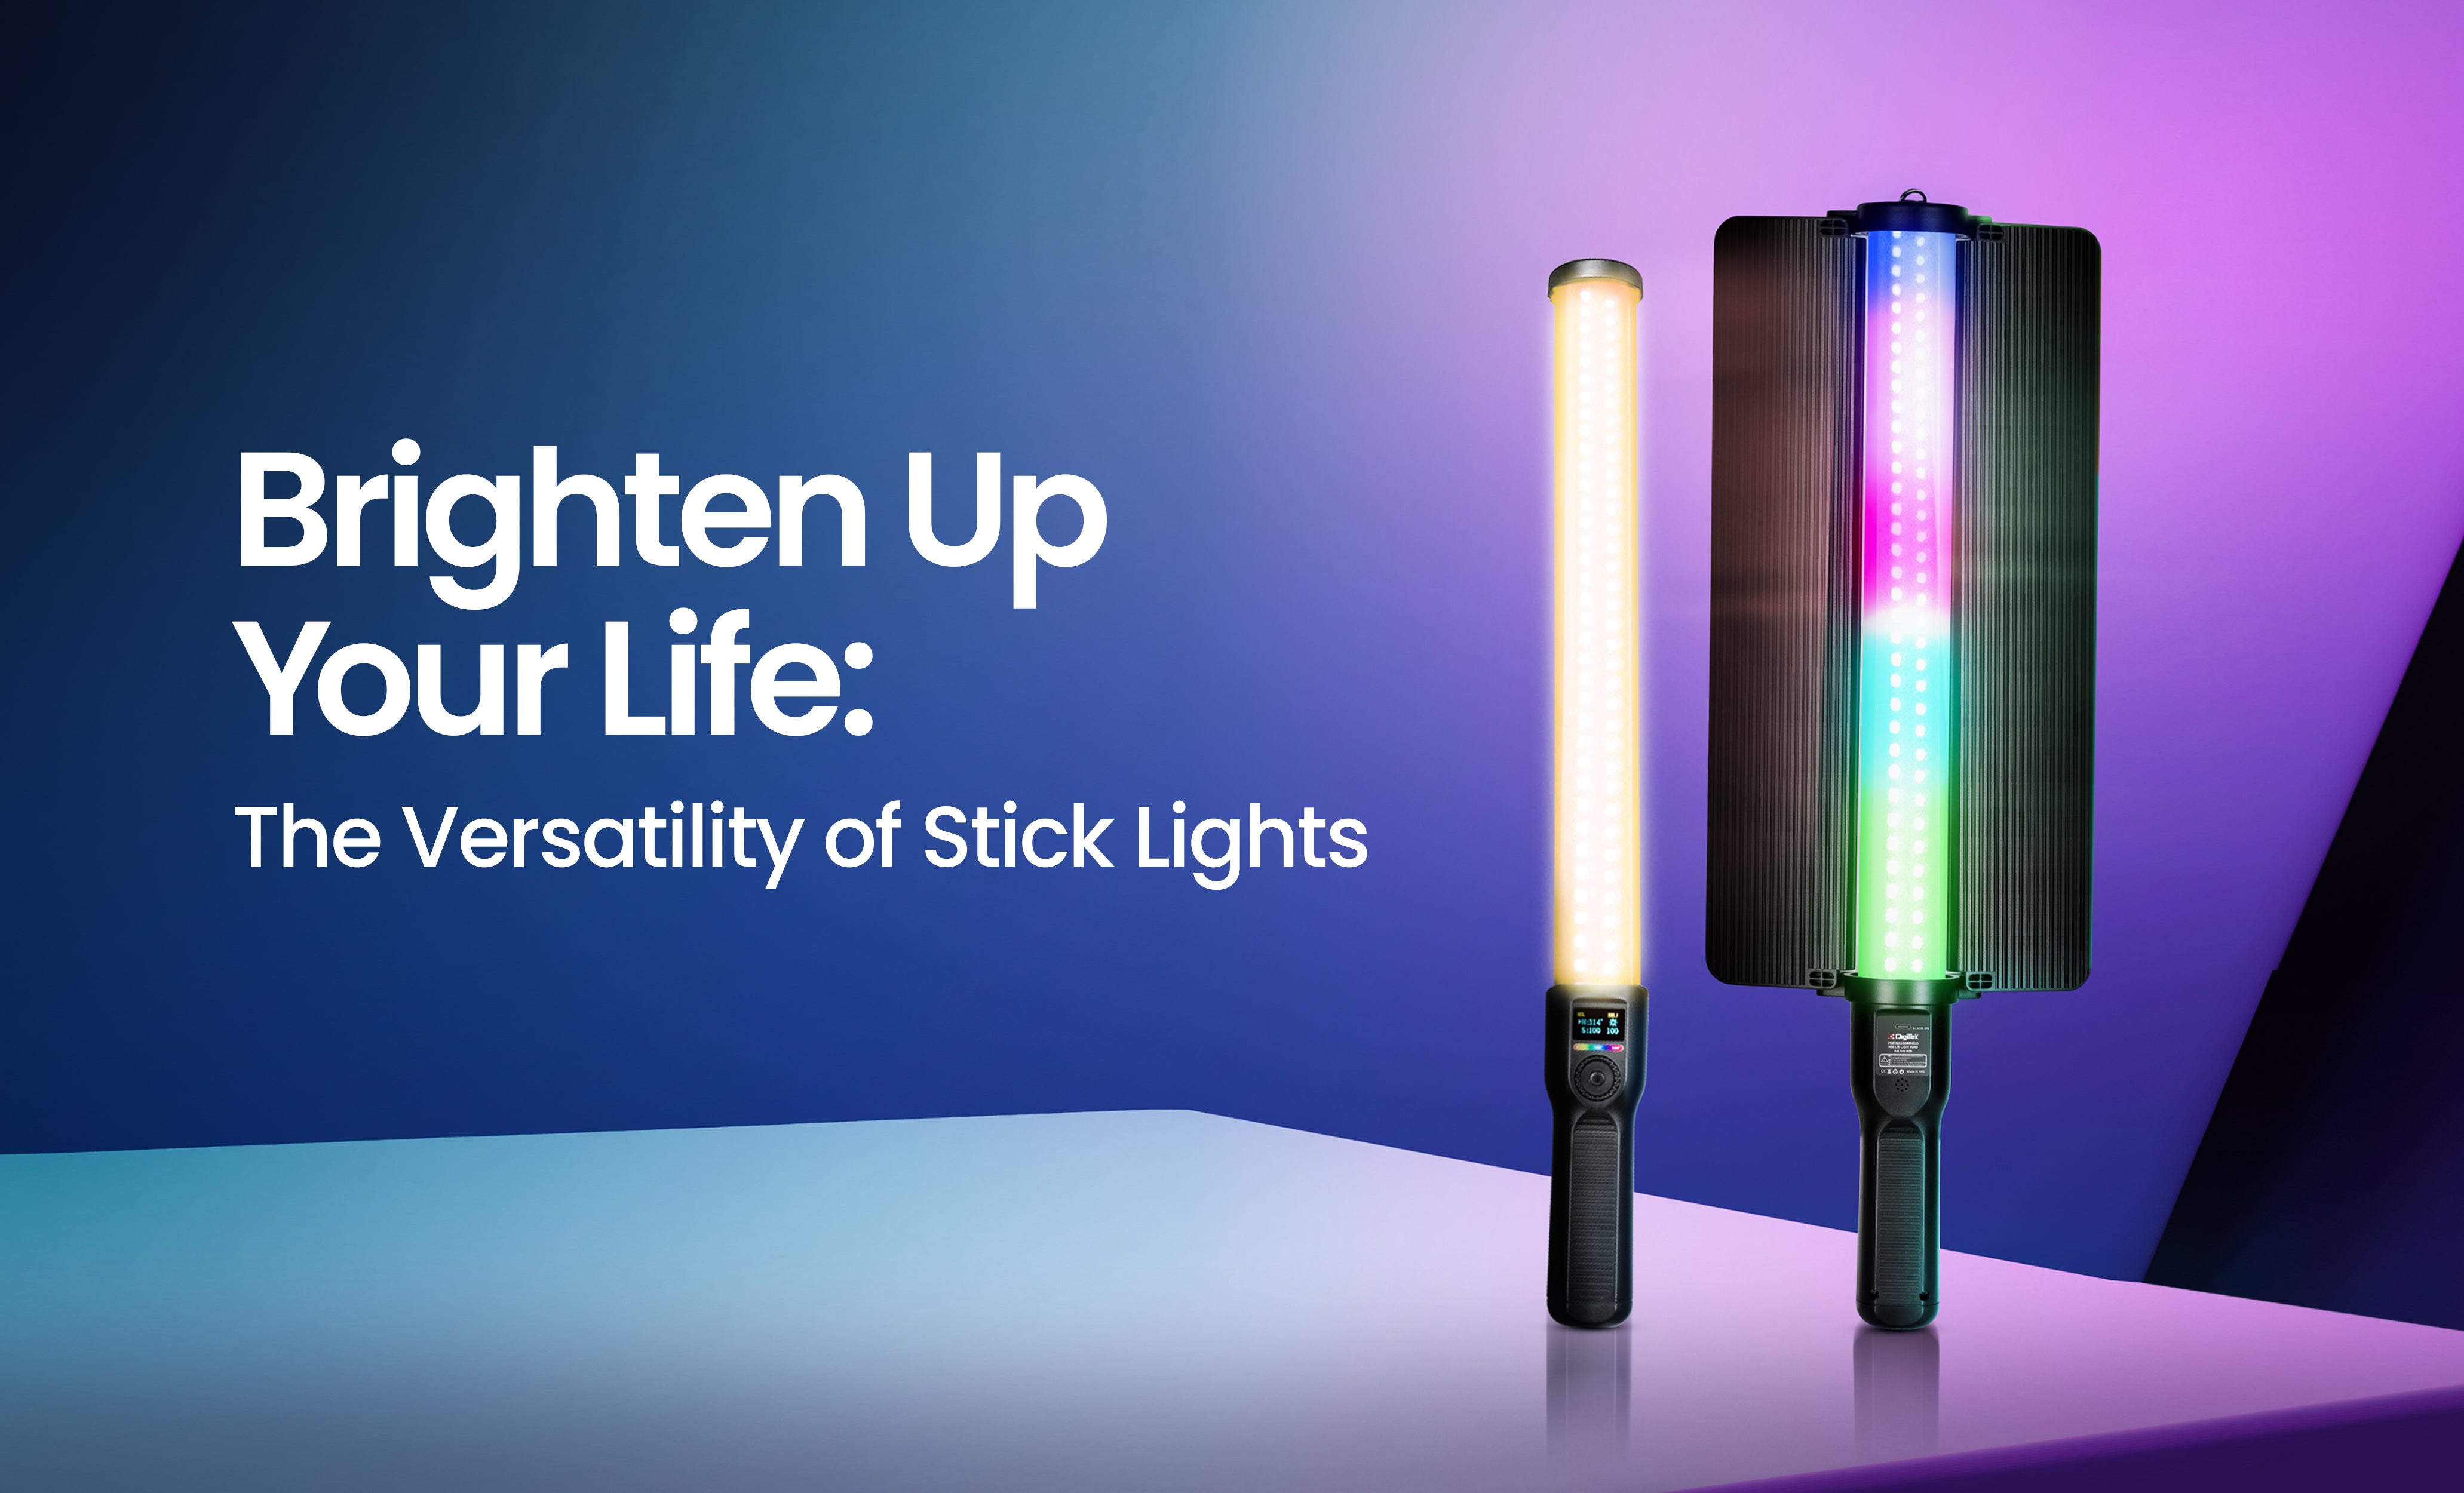 Brighten Up Your Life: The Versatility of Stick Lights